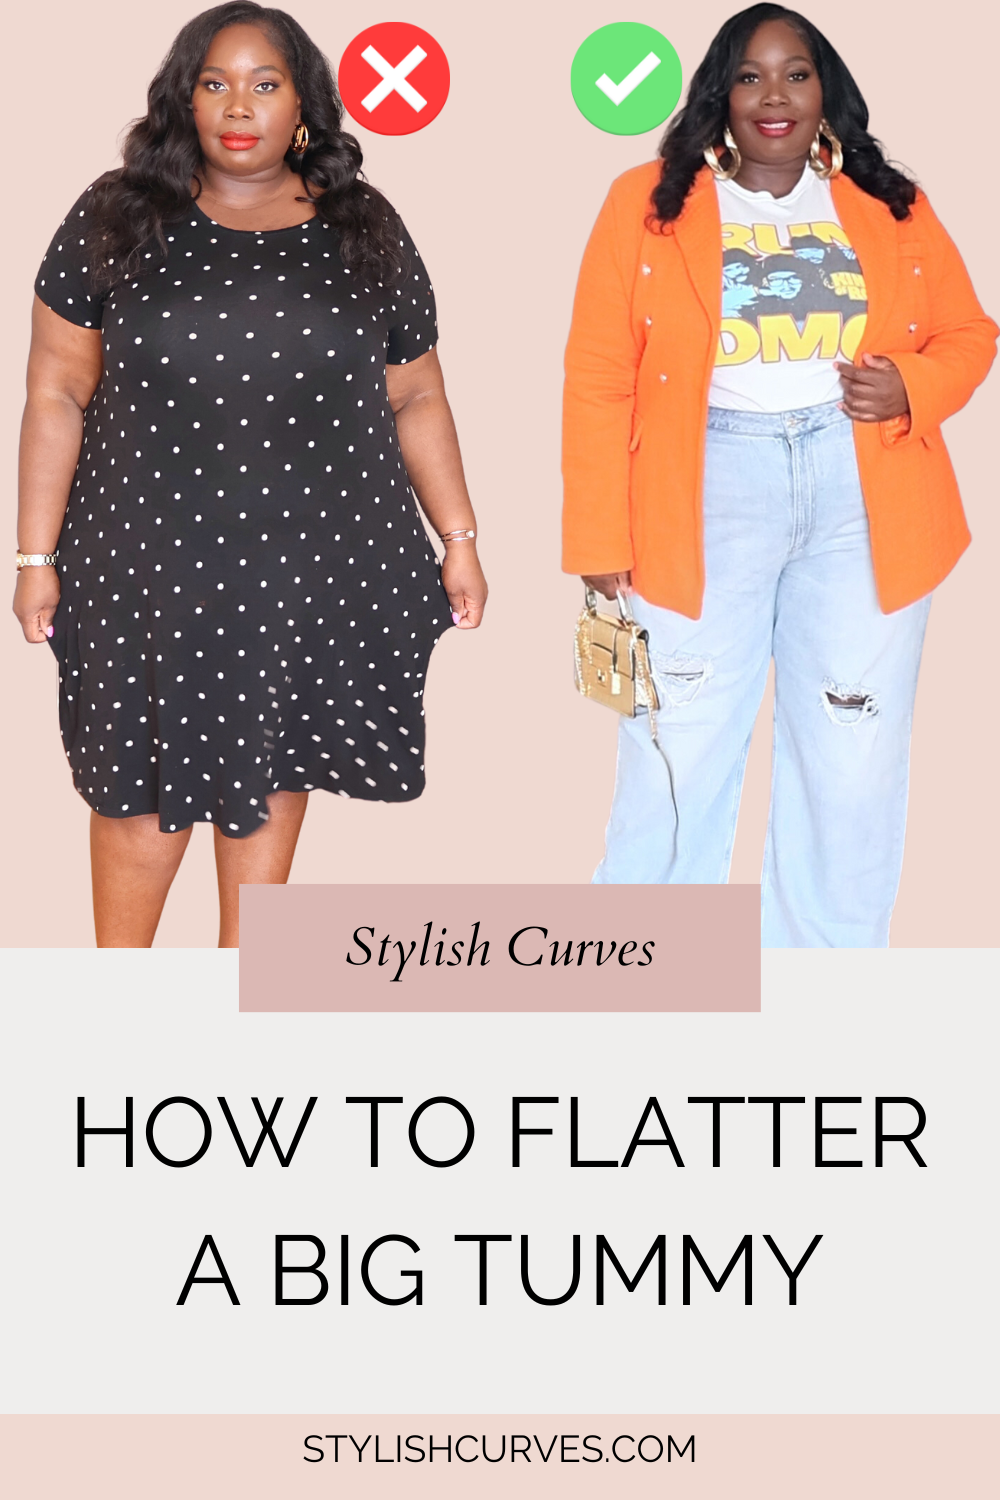 Can shapewear disguise this? : r/PlusSizeFashion